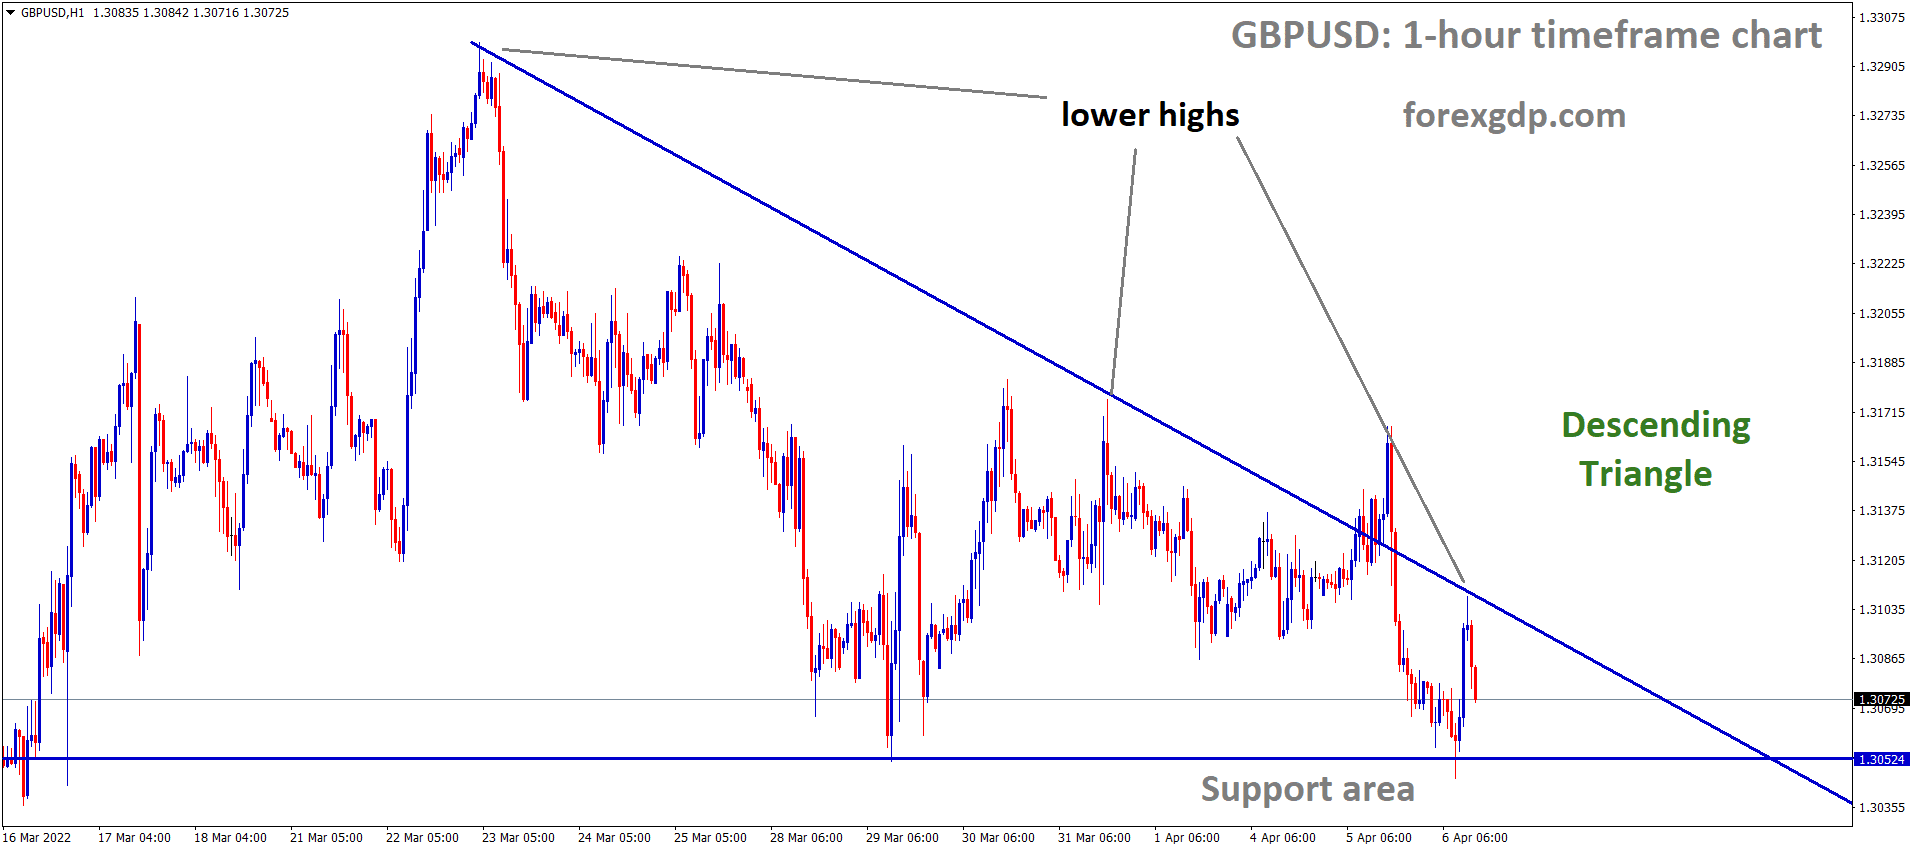 GBPUSD H1 Time Frame Market has Fallen from the Lower high area of the Descending triangle pattern